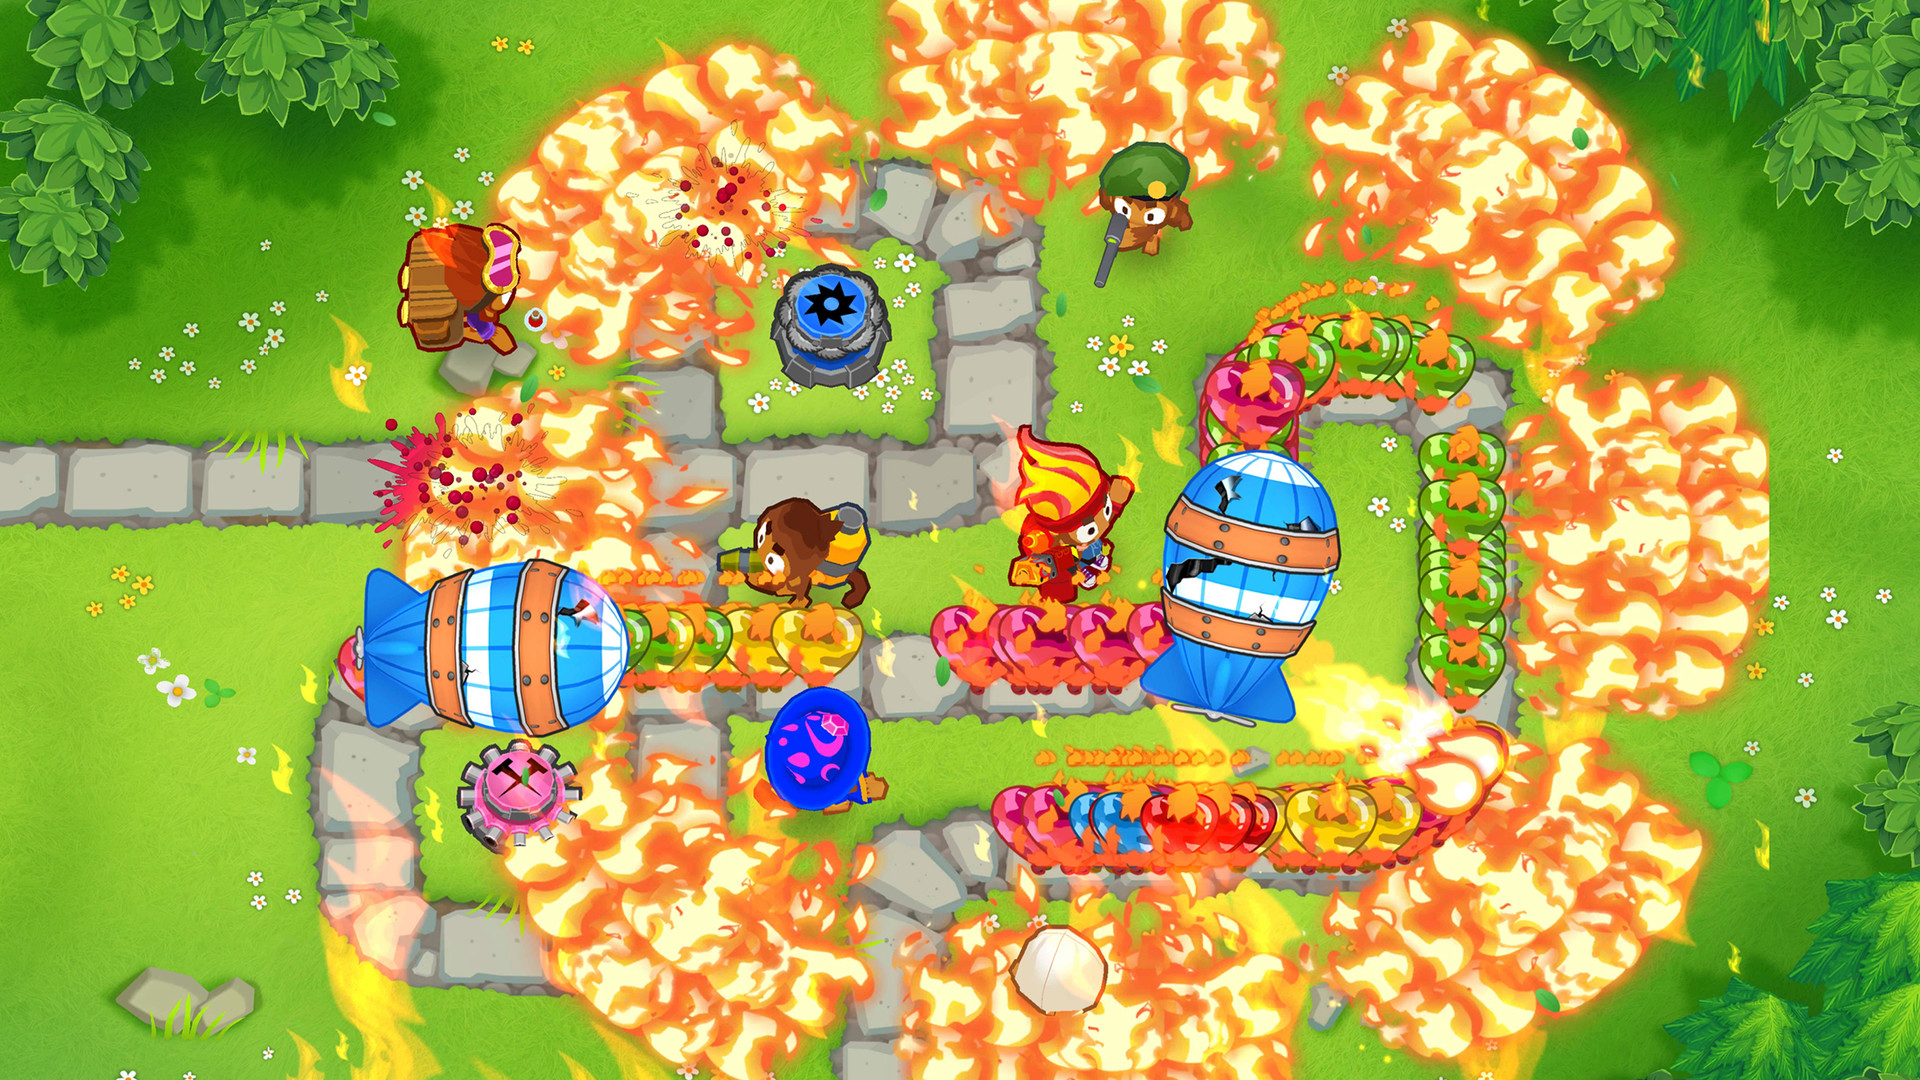 bloons tower defense 6 on pc